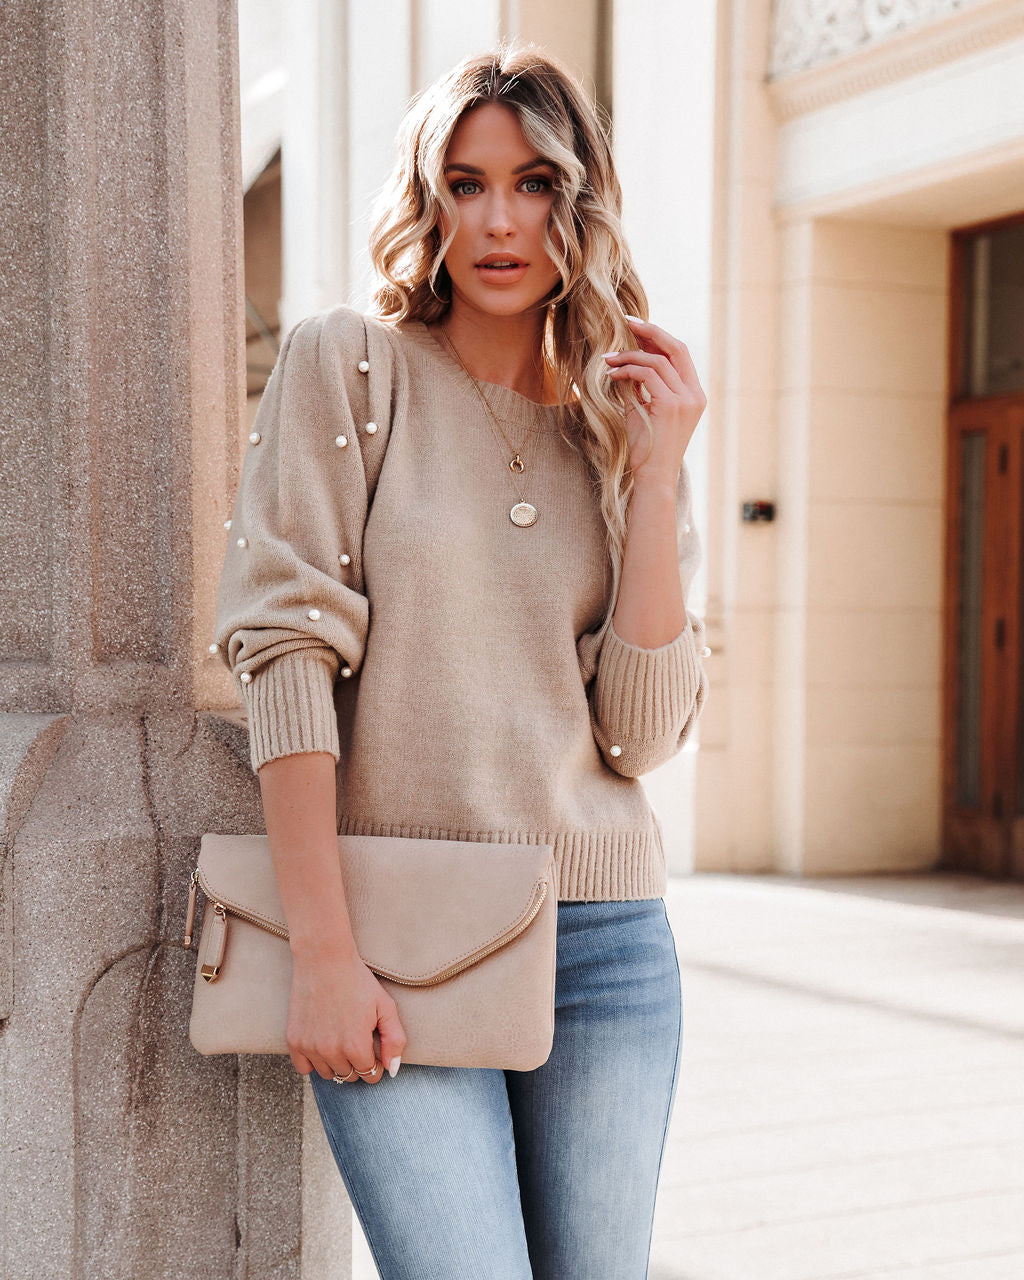 Yorkville Pearl Embellished Knit Sweater - Almond Ins Street